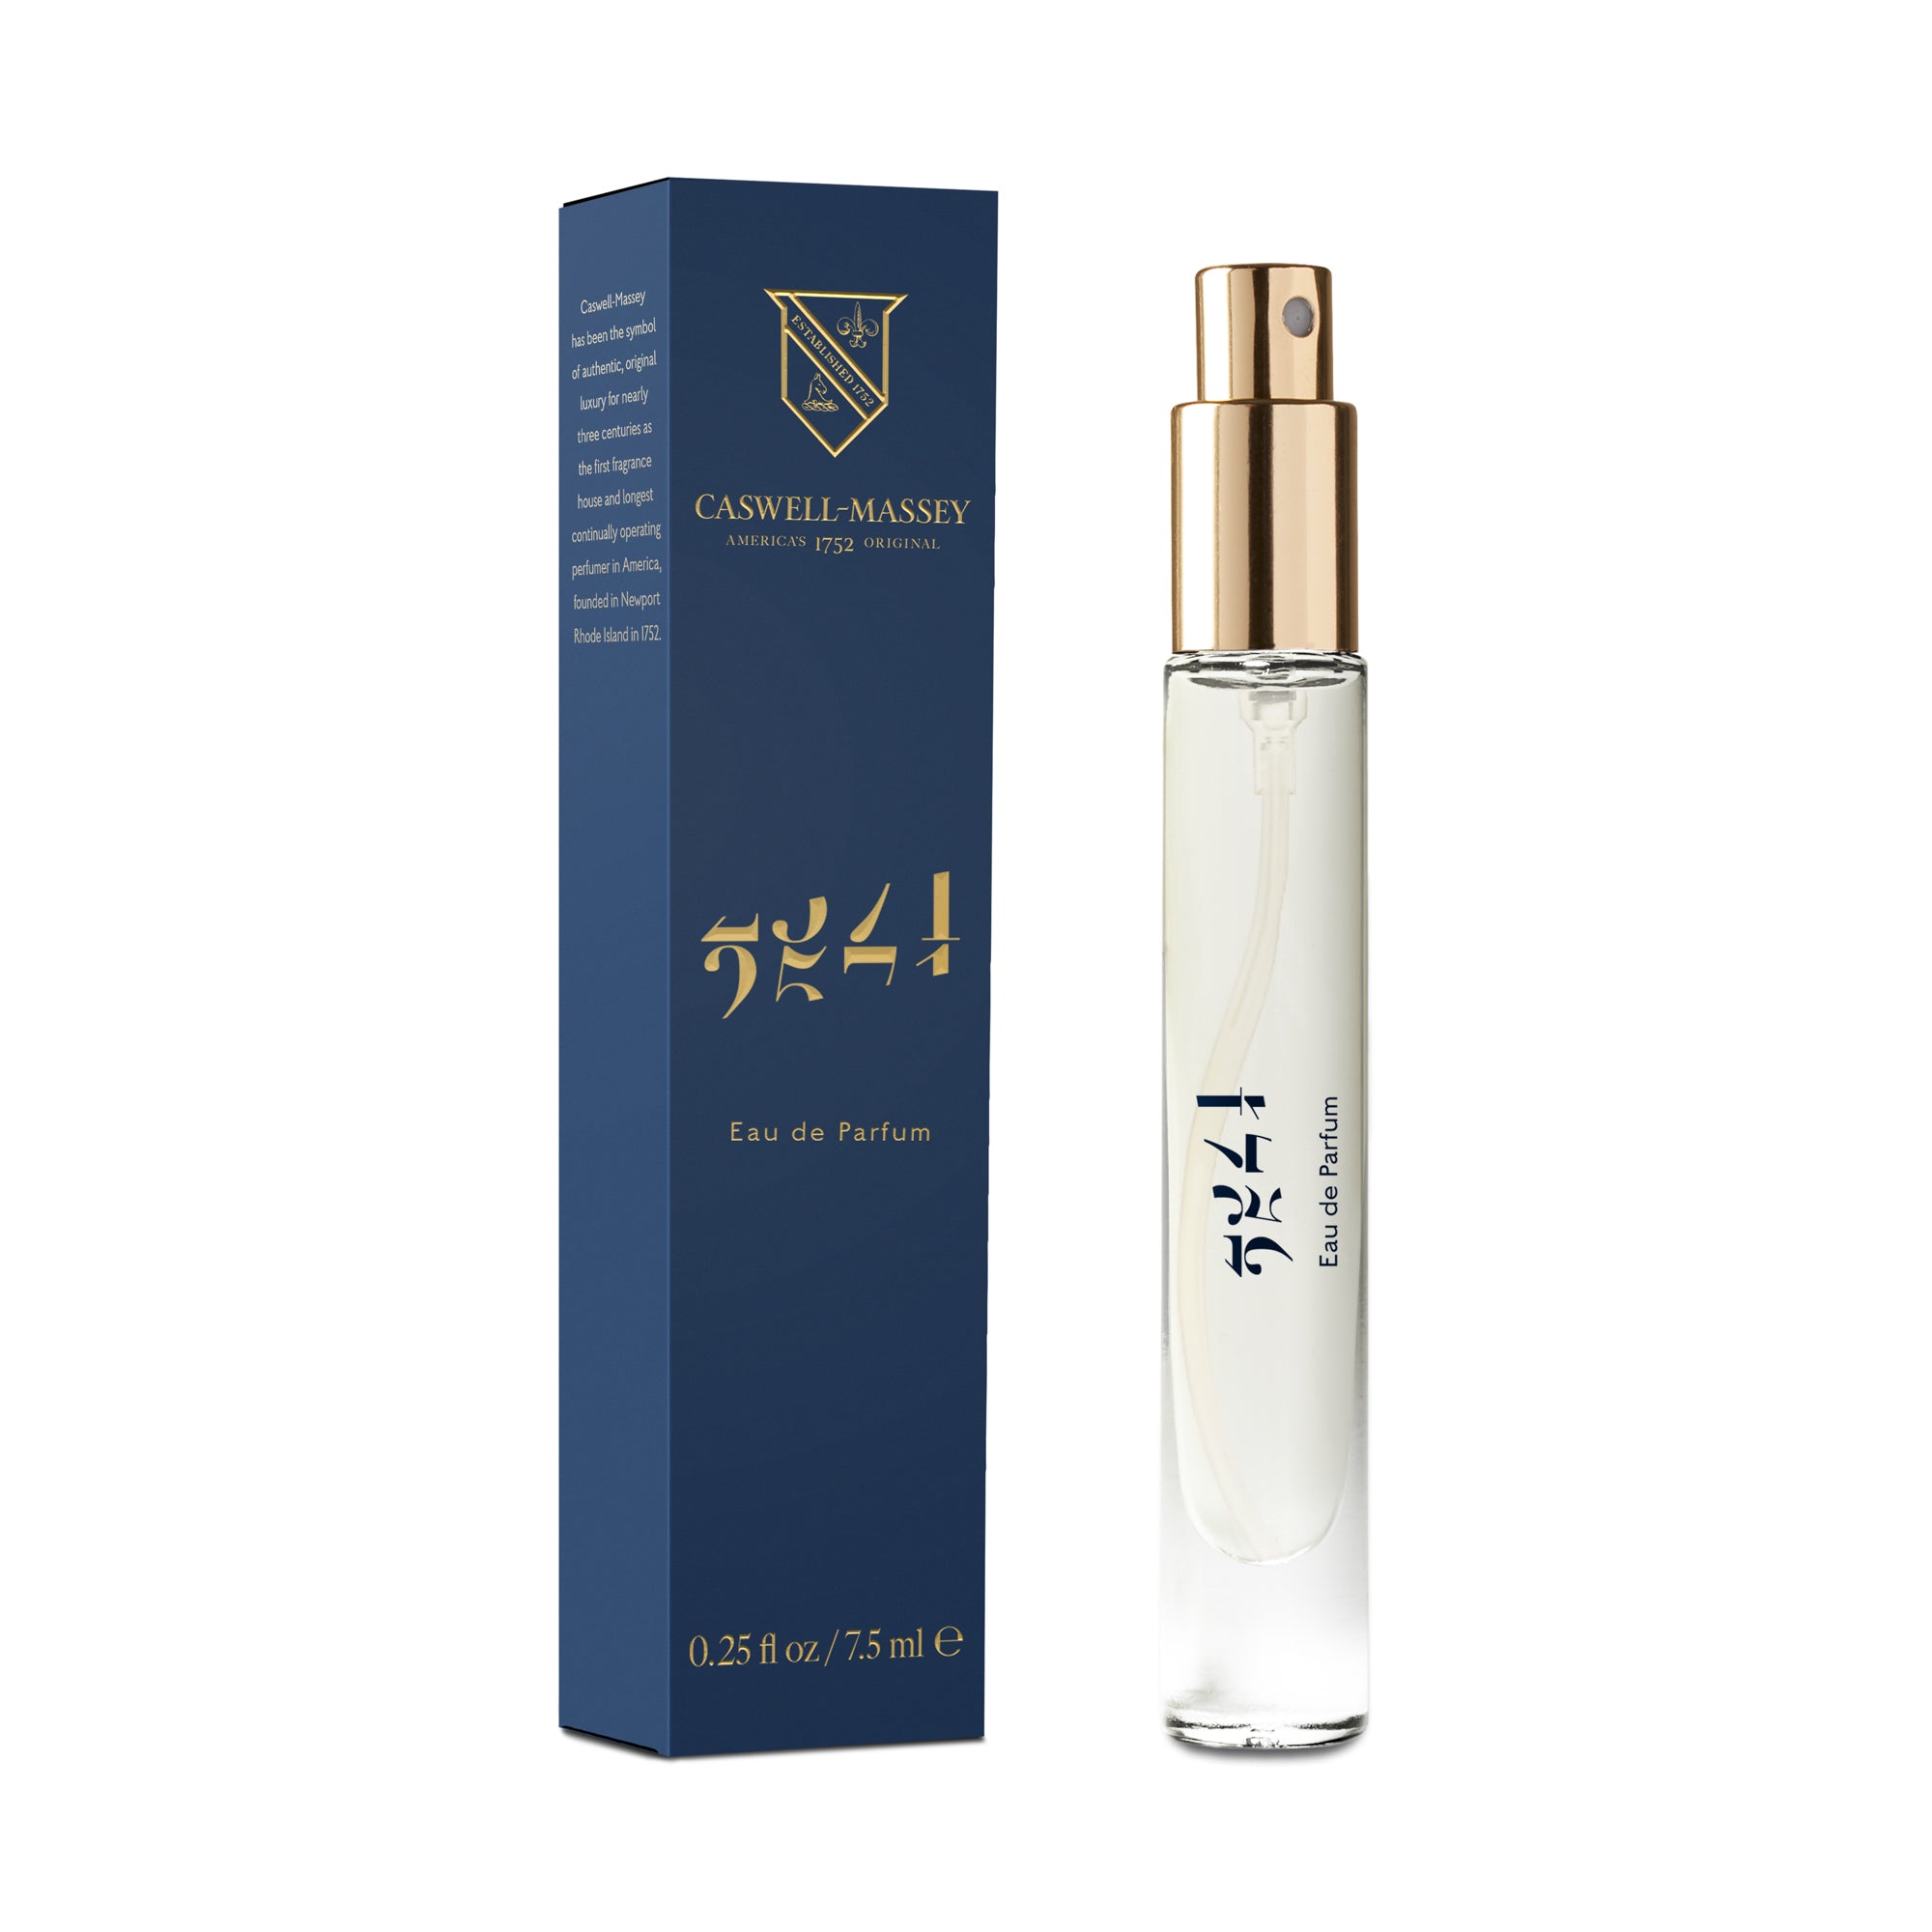 2571 EDP Fine Fragrance by Caswell-Massey 7.5mL Discovery-Size, shown next to navy blue box